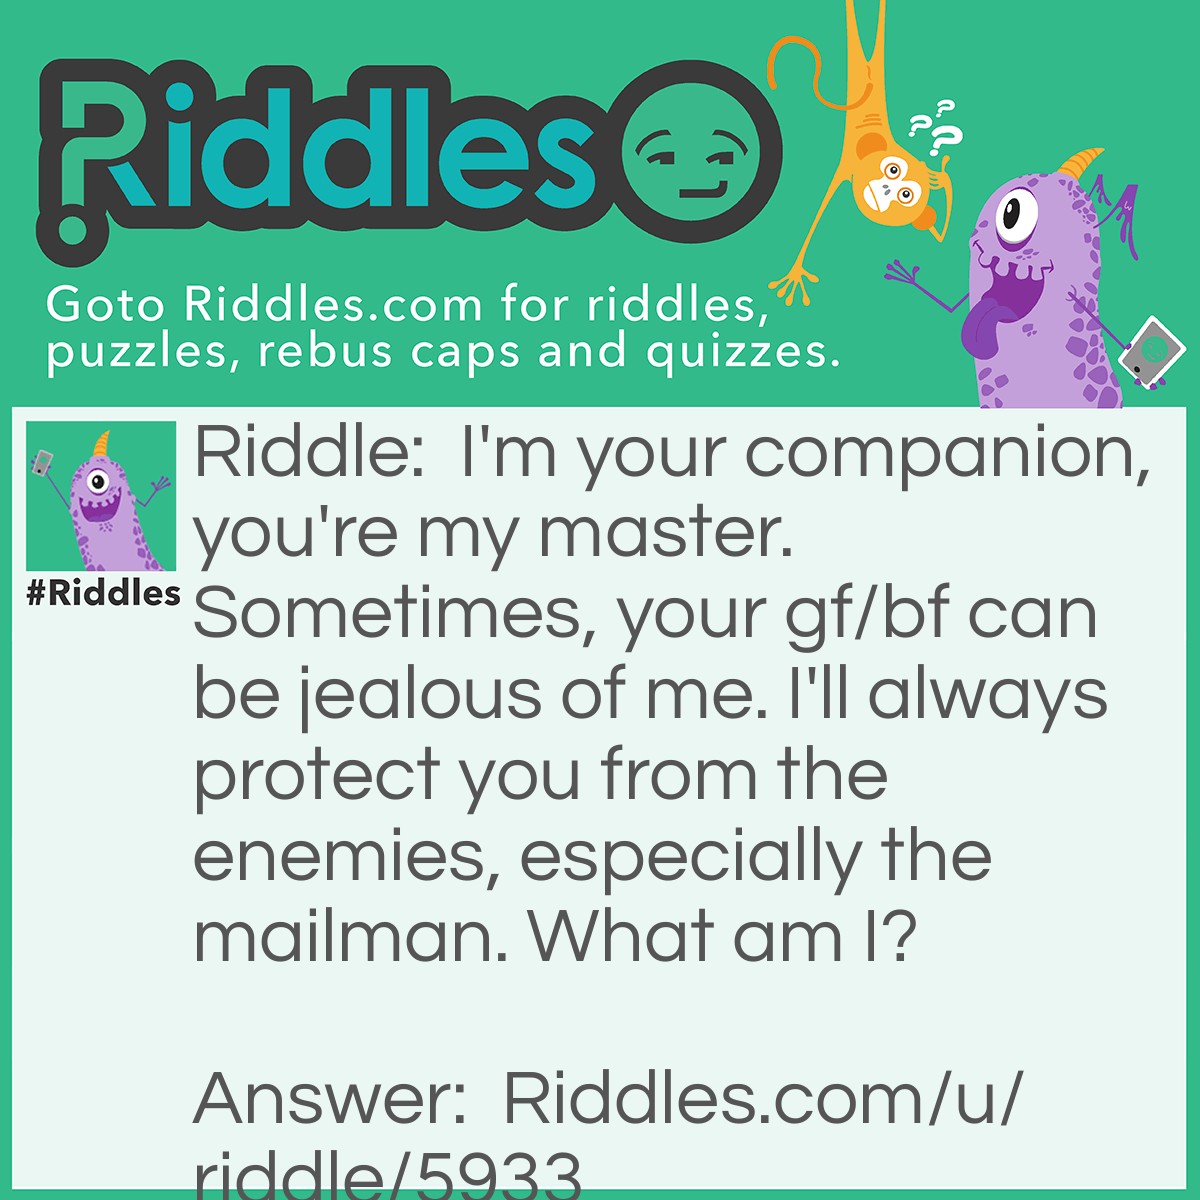 Riddle: I'm your companion, you're my master. Sometimes, your gf/bf can be jealous of me. I'll always protect you from the enemies, especially the mailman. What am I? Answer: A dog.